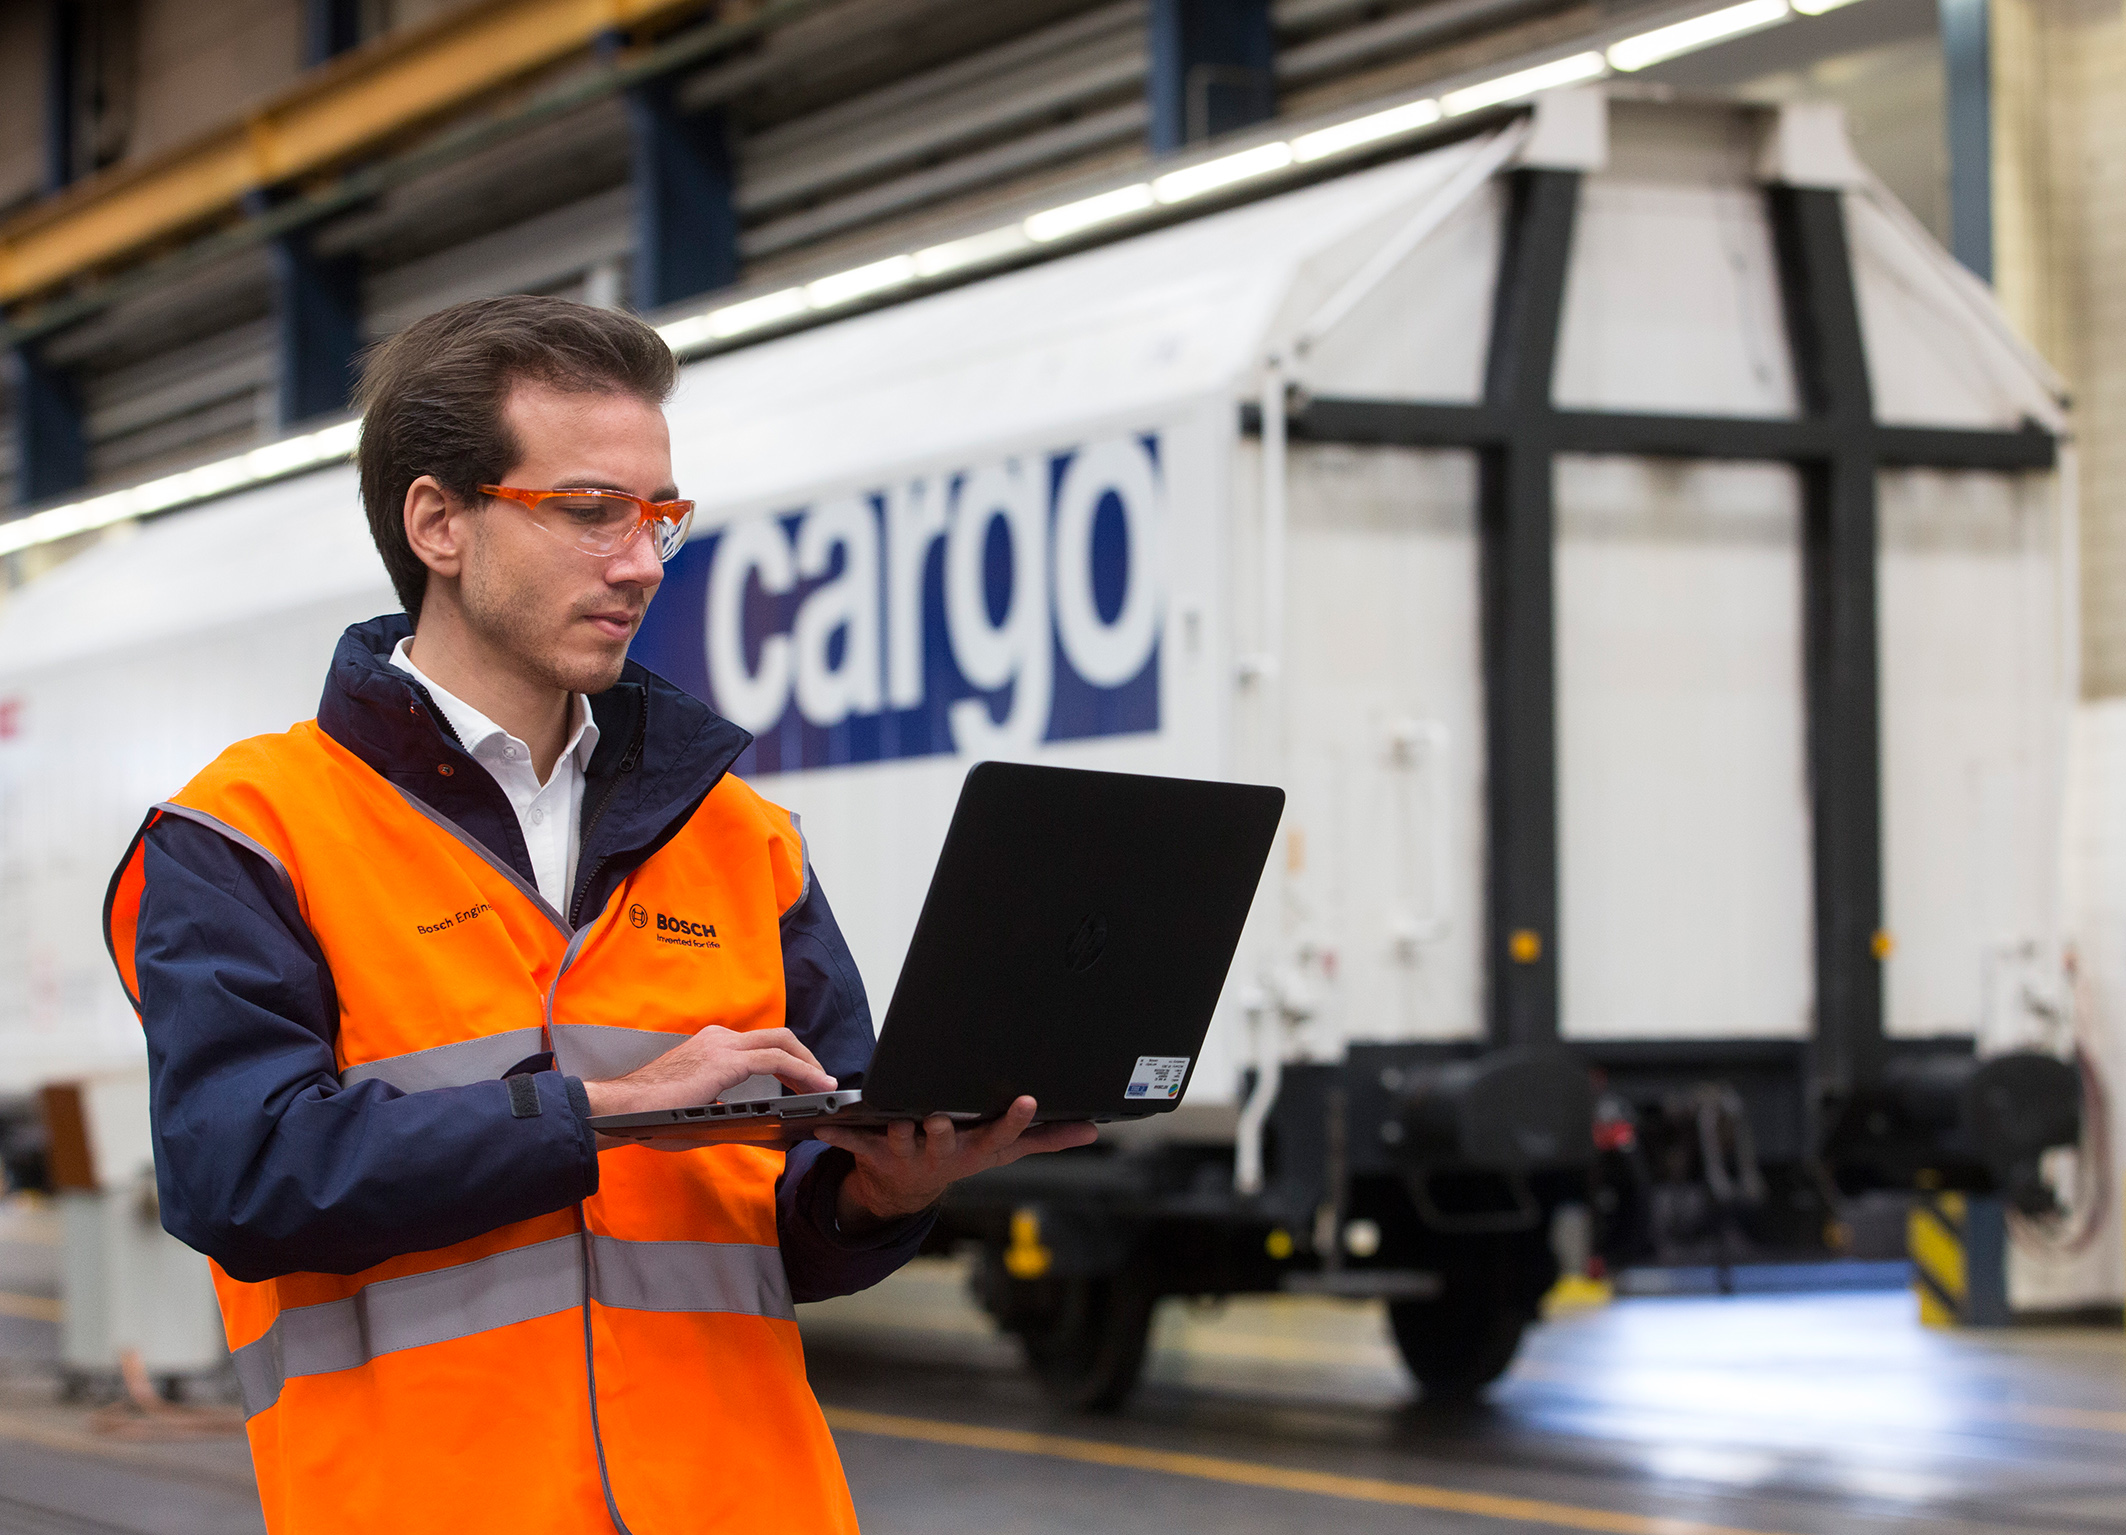 Connected technology for efficient logistics